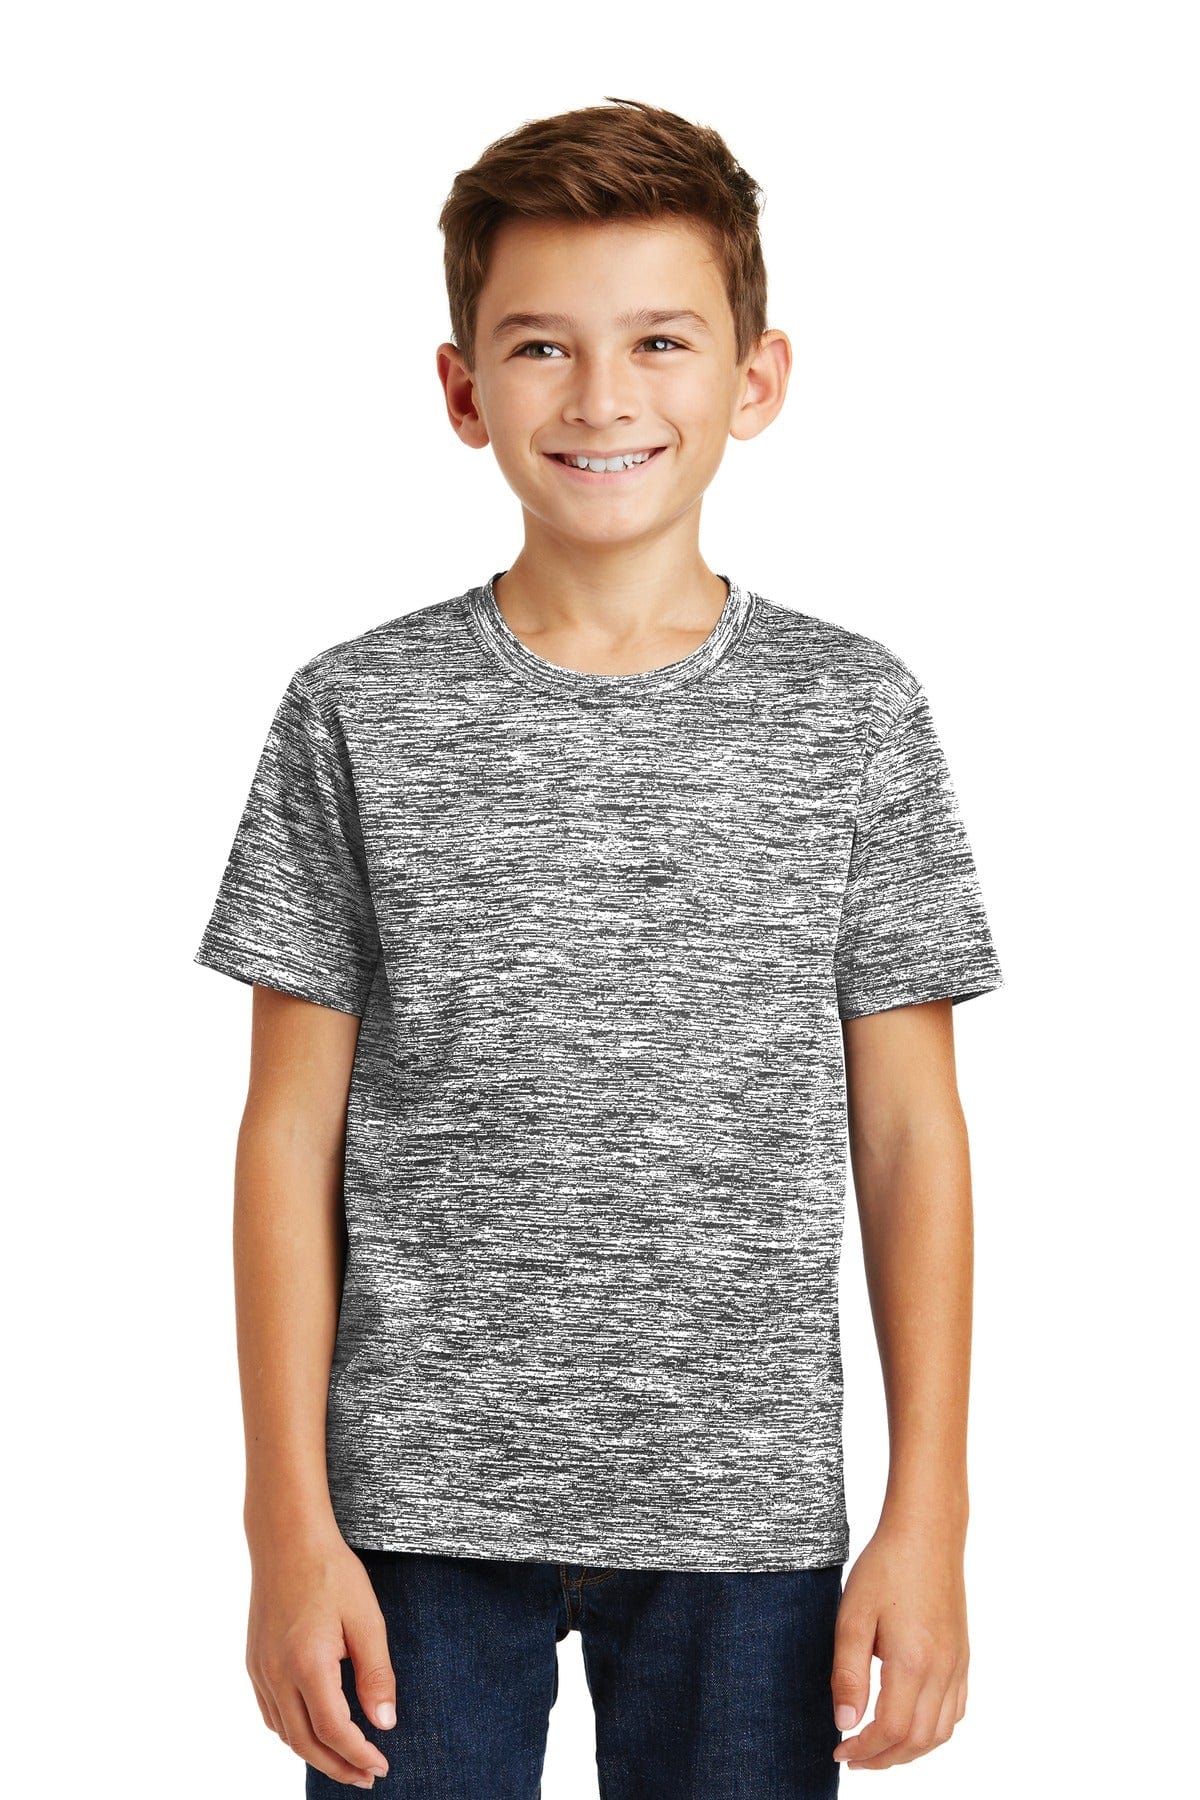 Sport-Tek ® Youth PosiCharge ® Electric Heather Tee. YST390